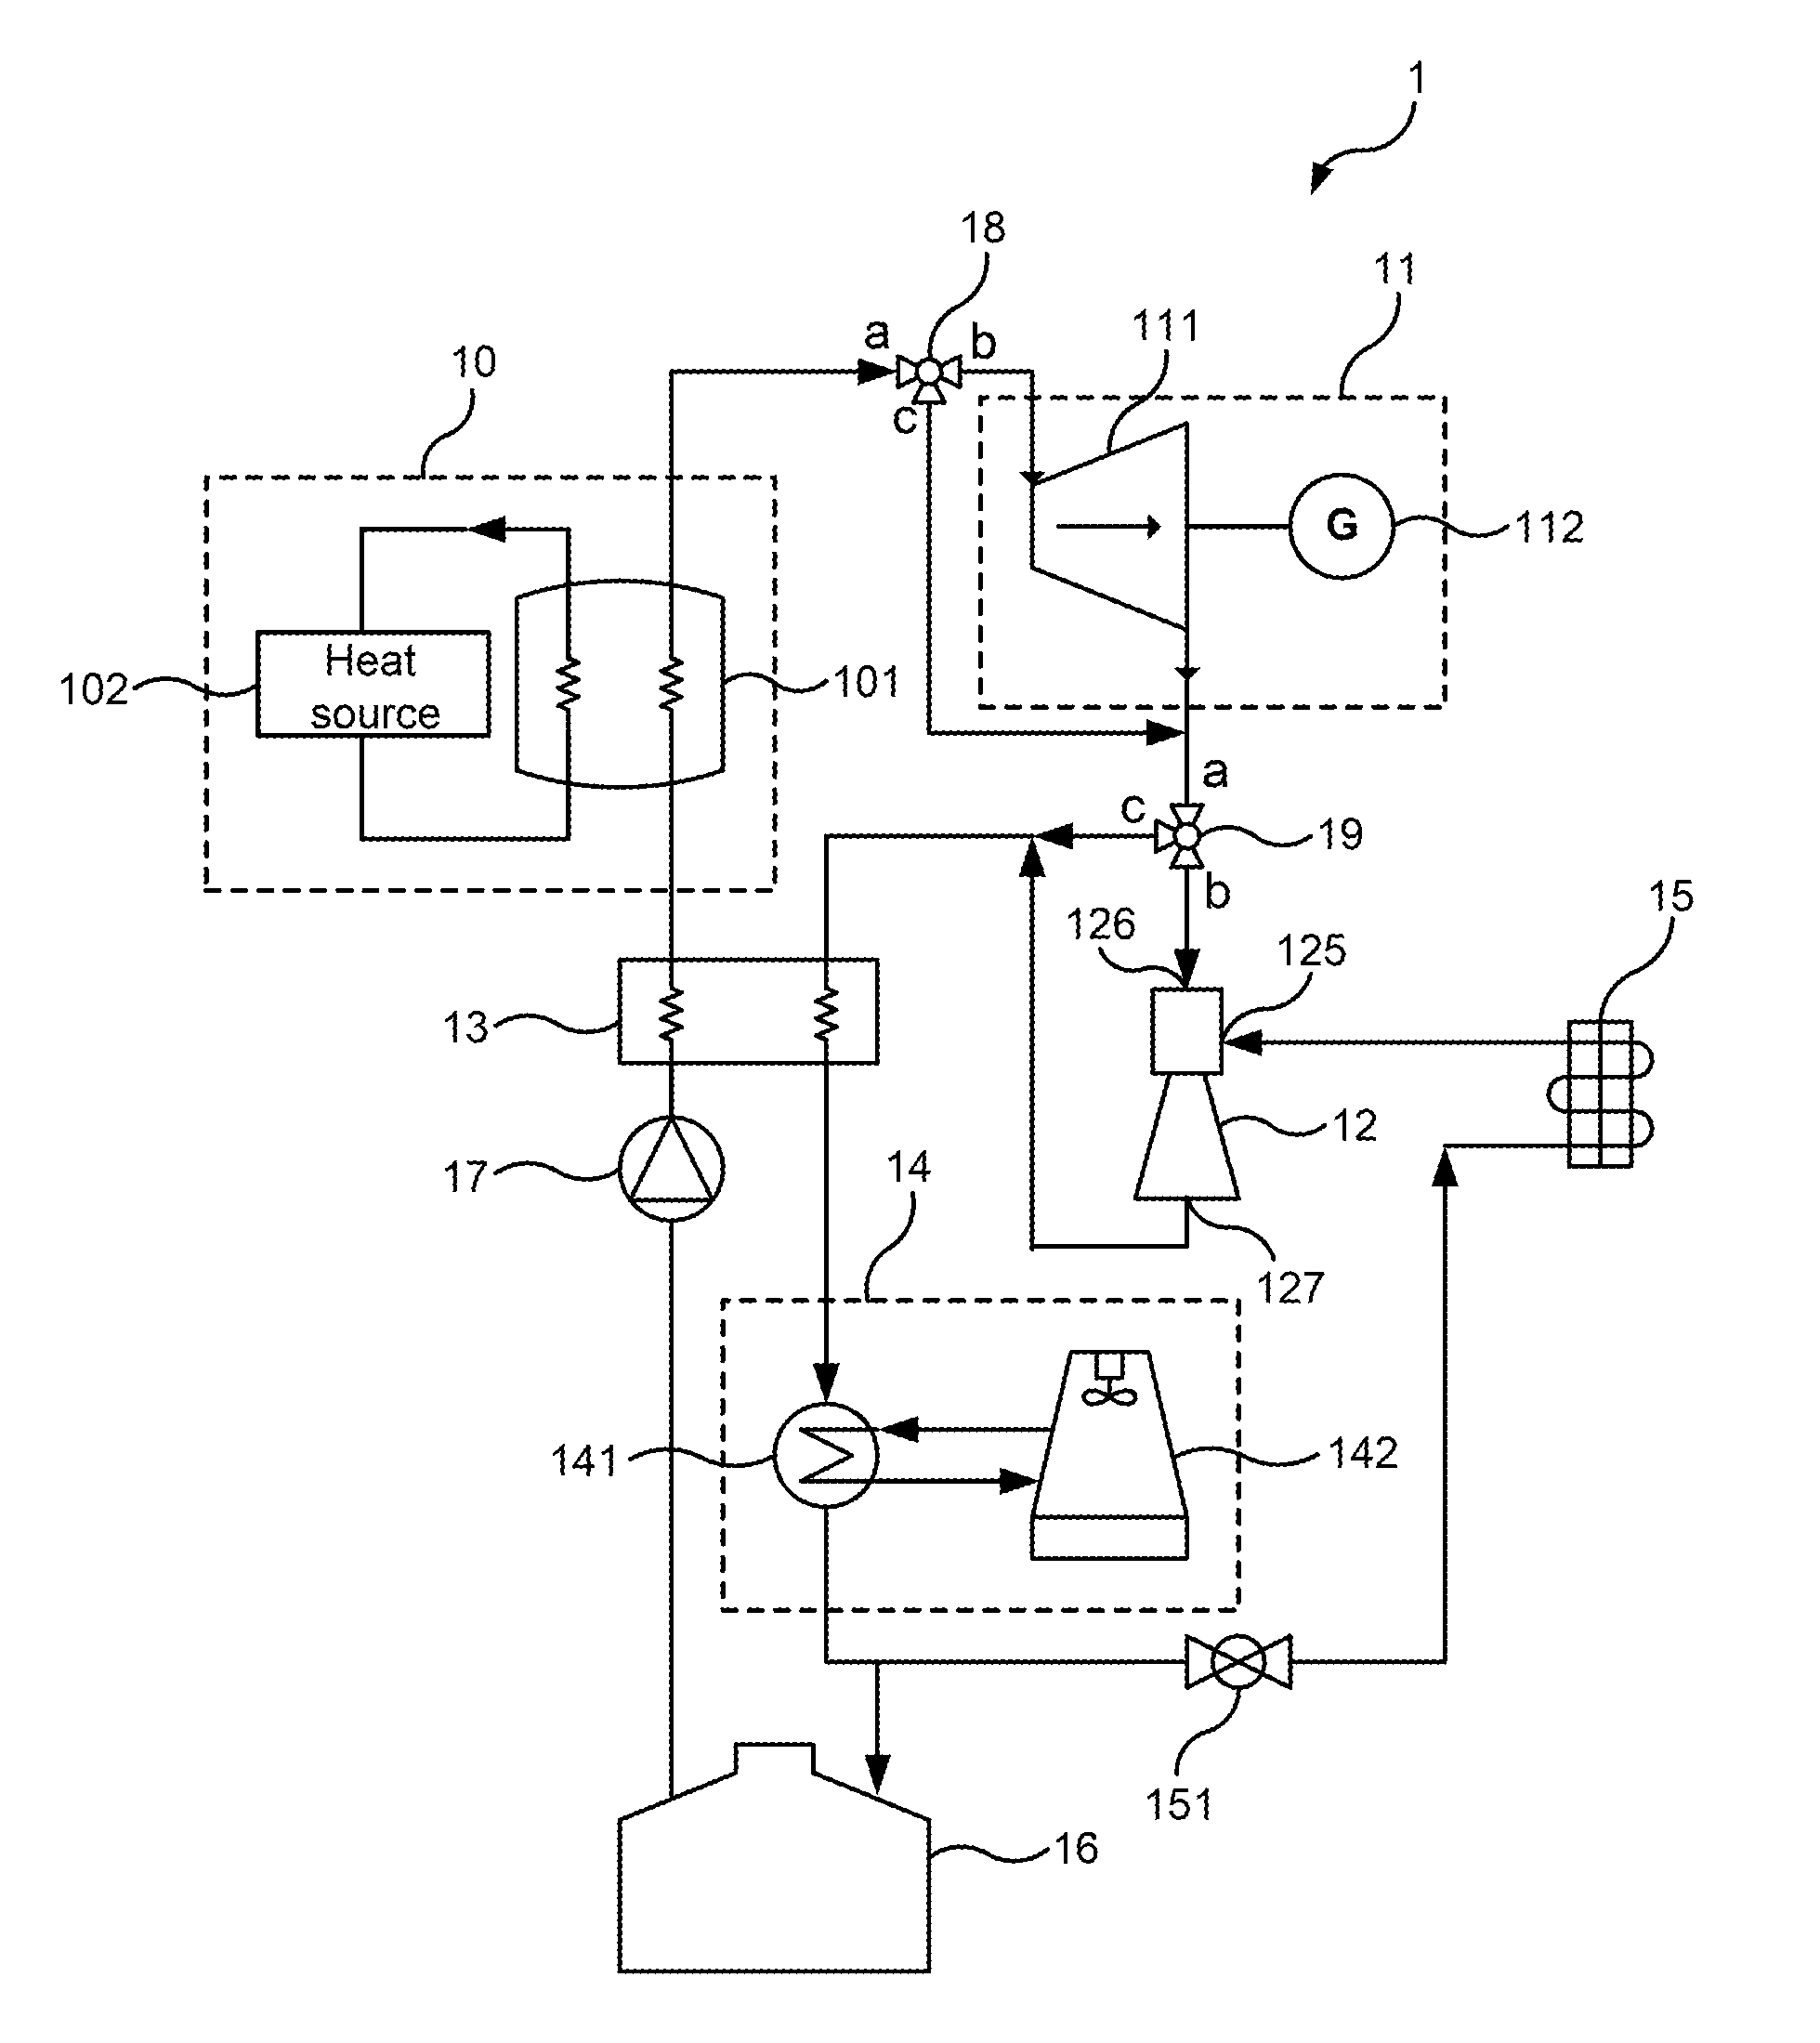 Apparatus and Method for Generating Power and Refrigeration from Low-Grade Heat